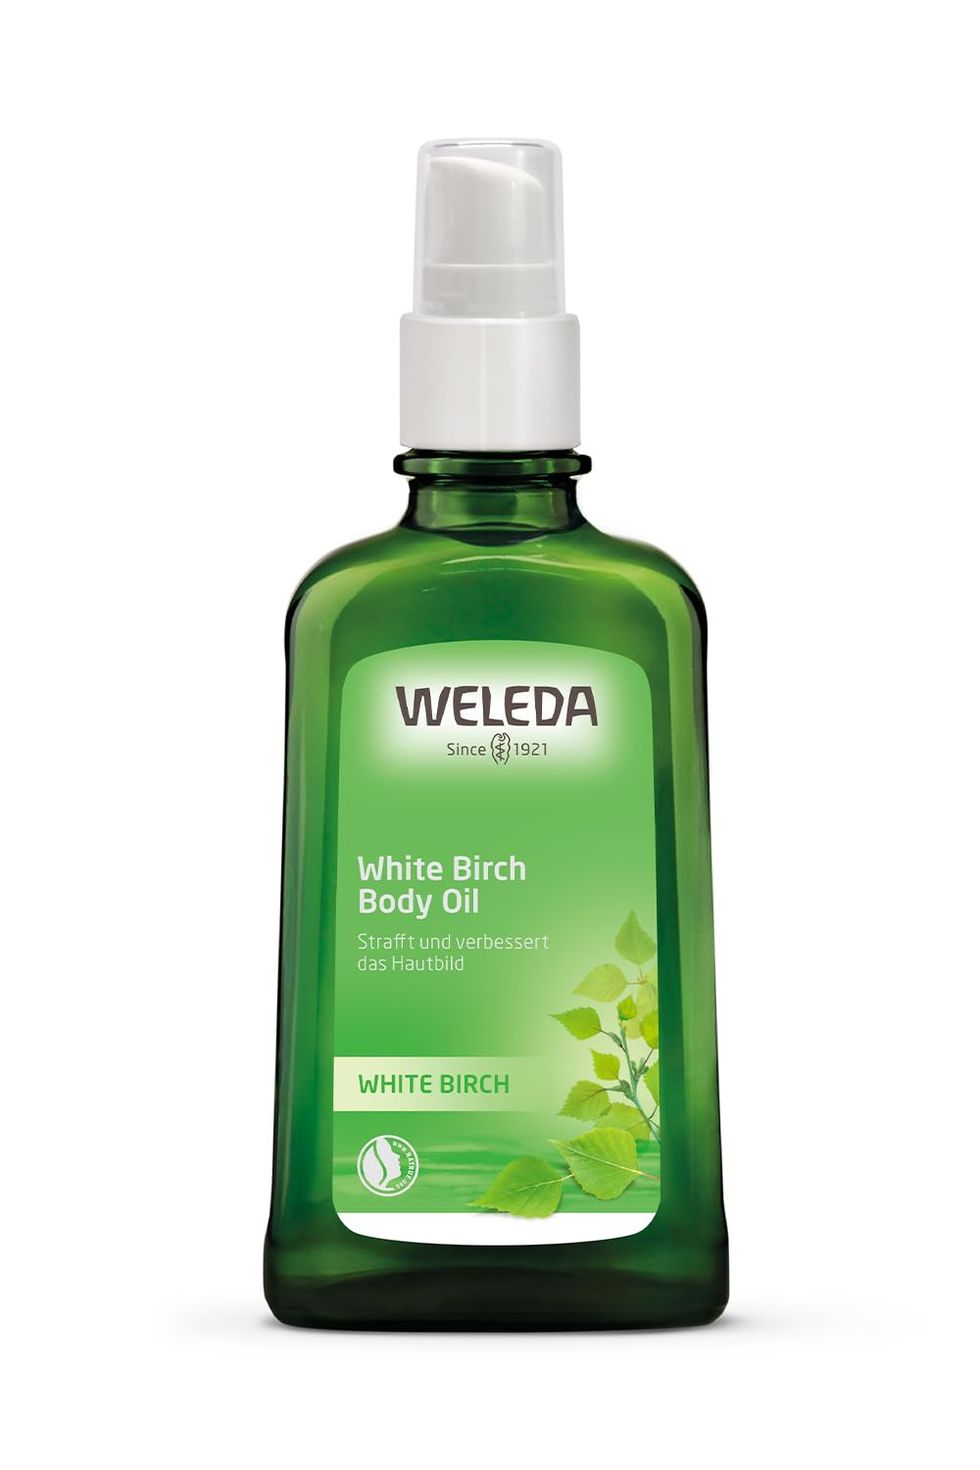 White birch oil for cellulite, targeted treatment for cellulite spots  